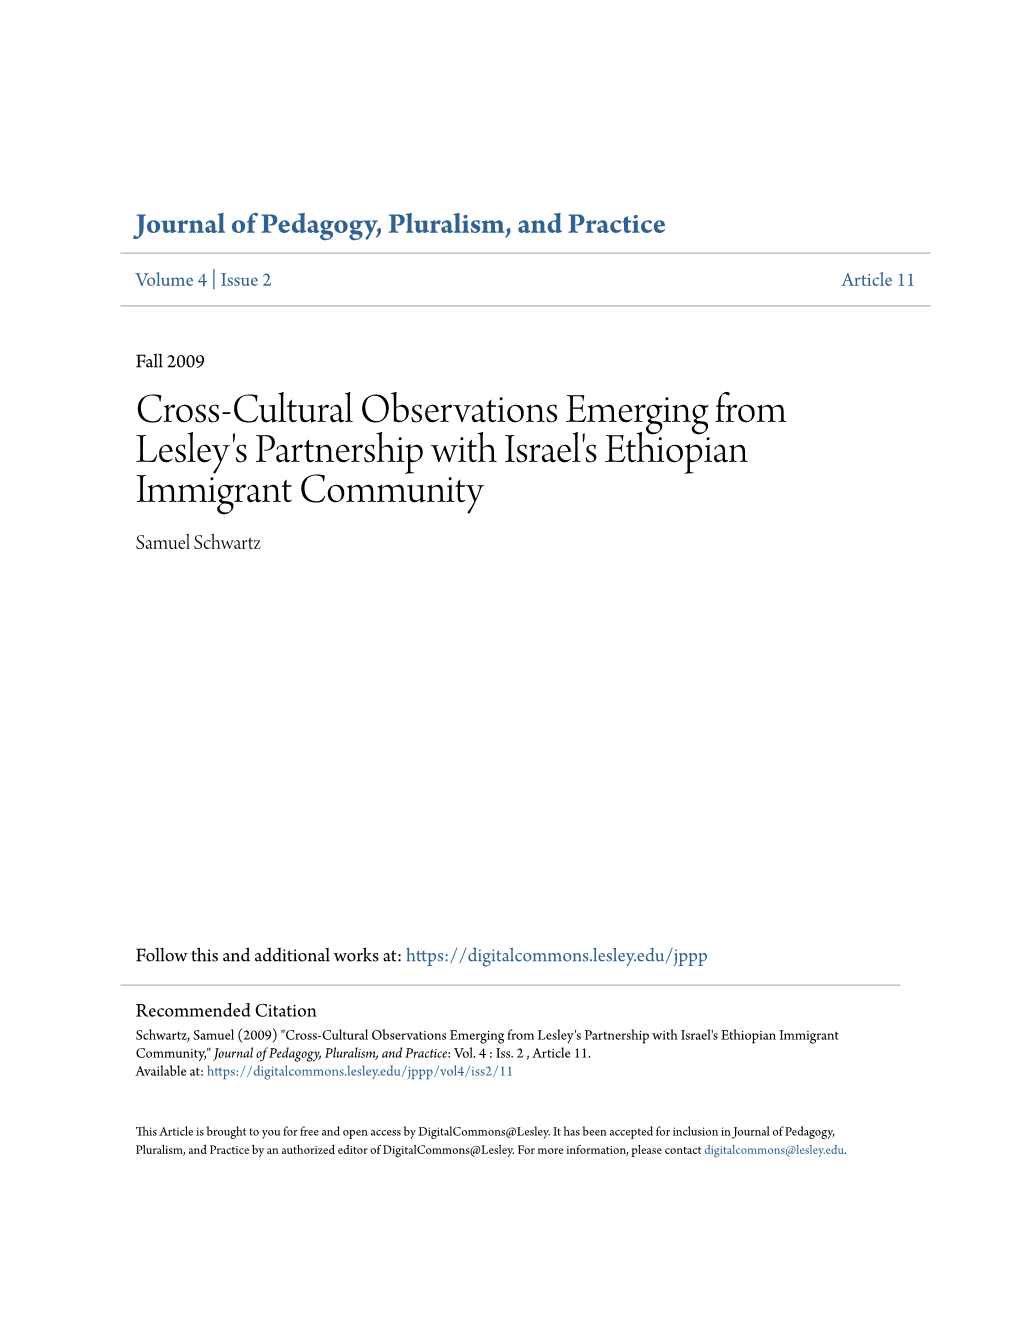 Cross-Cultural Observations Emerging from Lesley's Partnership with Israel's Ethiopian Immigrant Community Samuel Schwartz